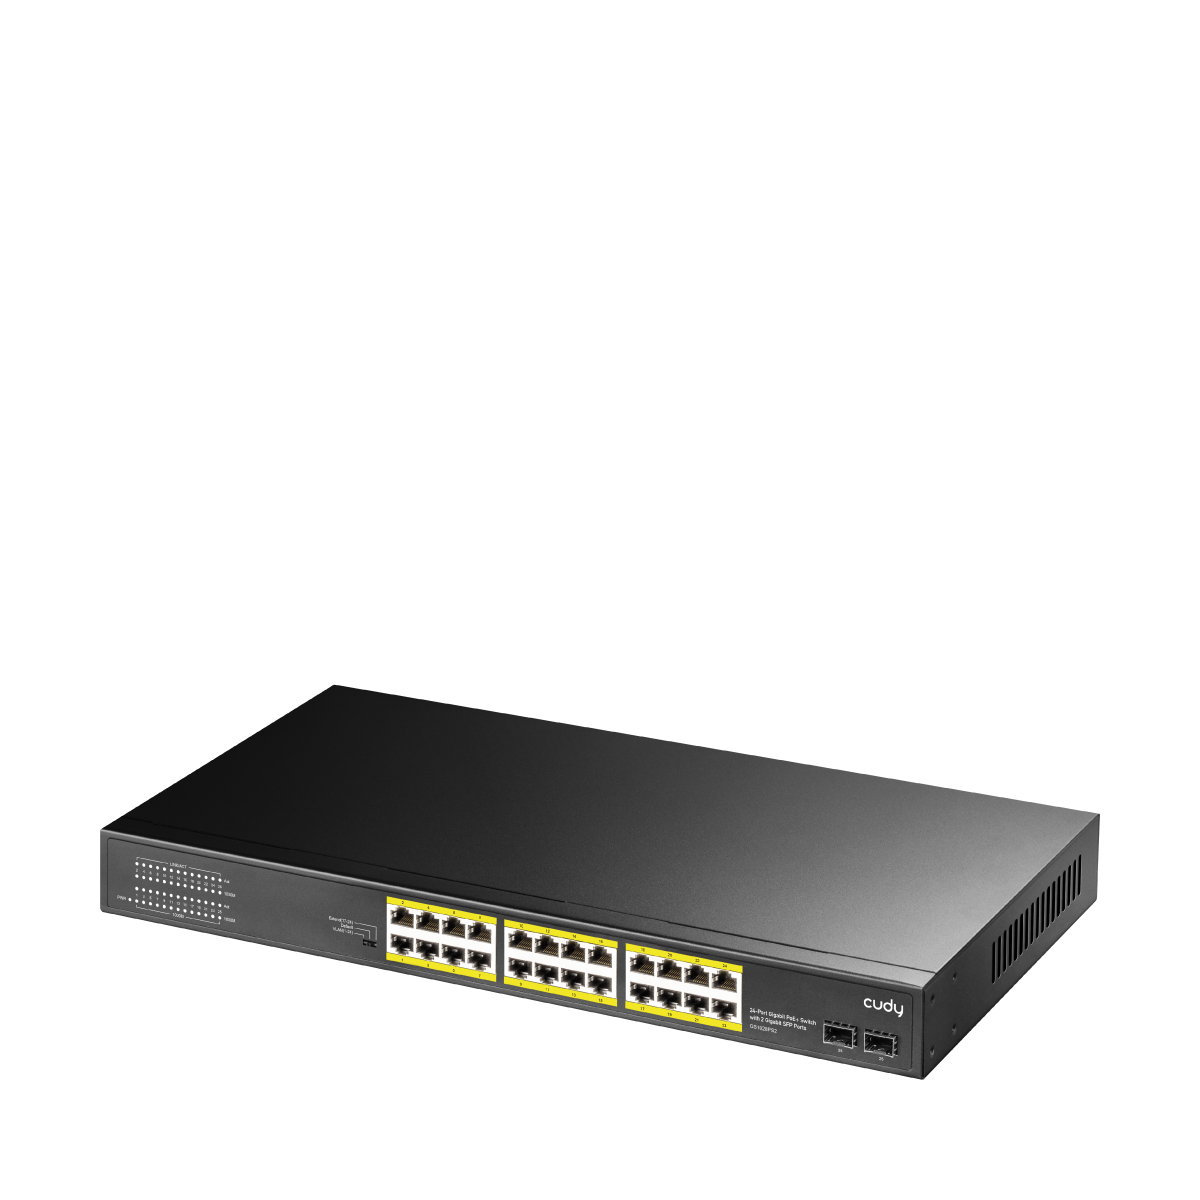 24-GbE PoE Switch with 2 Uplink SFP, GS1028PS2 2.0